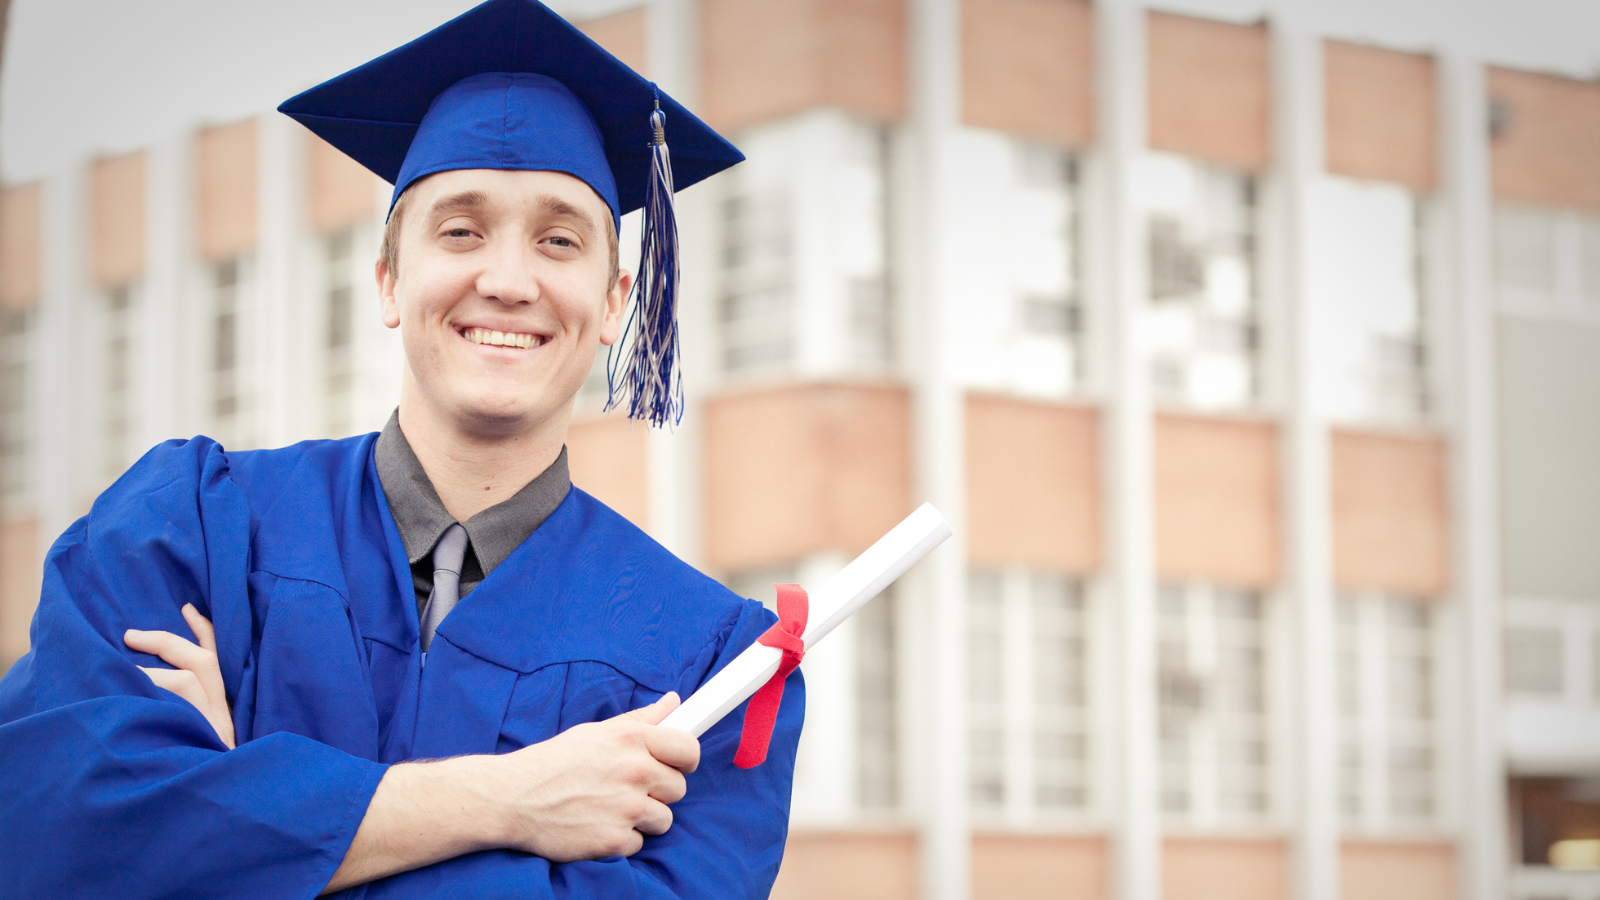 A man wearing a blue graduation gown and holding a diploma.